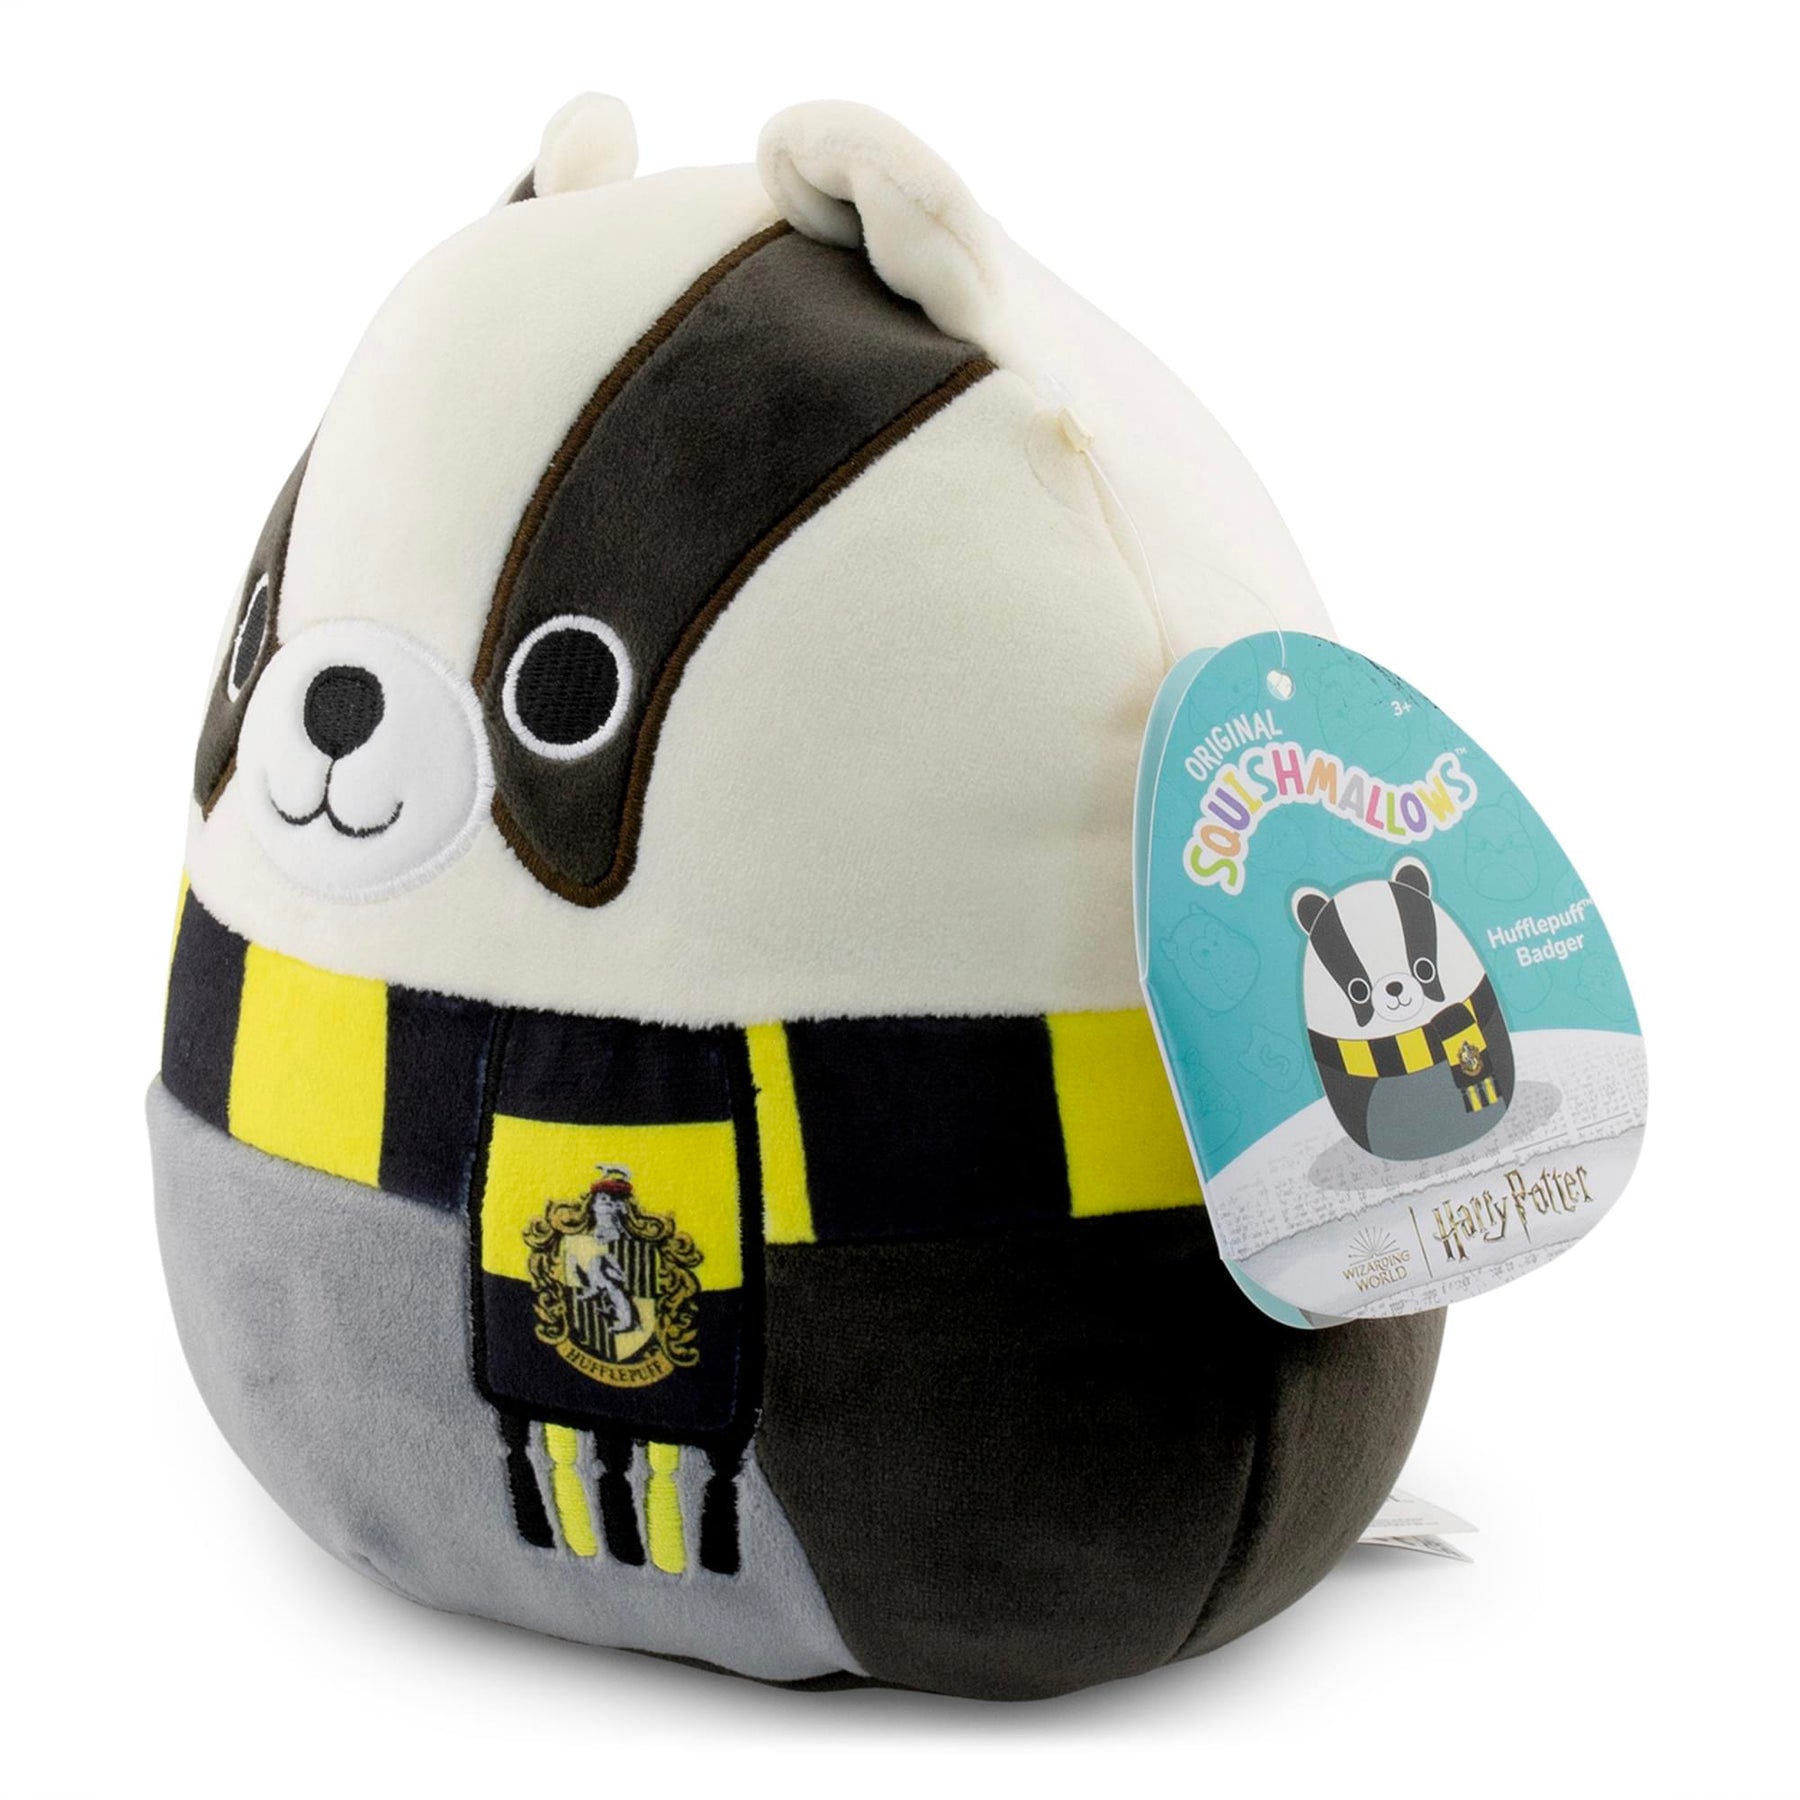 Squishmallow 8 Inch Hufflepuff Badger Harry Potter Plush Toy - Owl